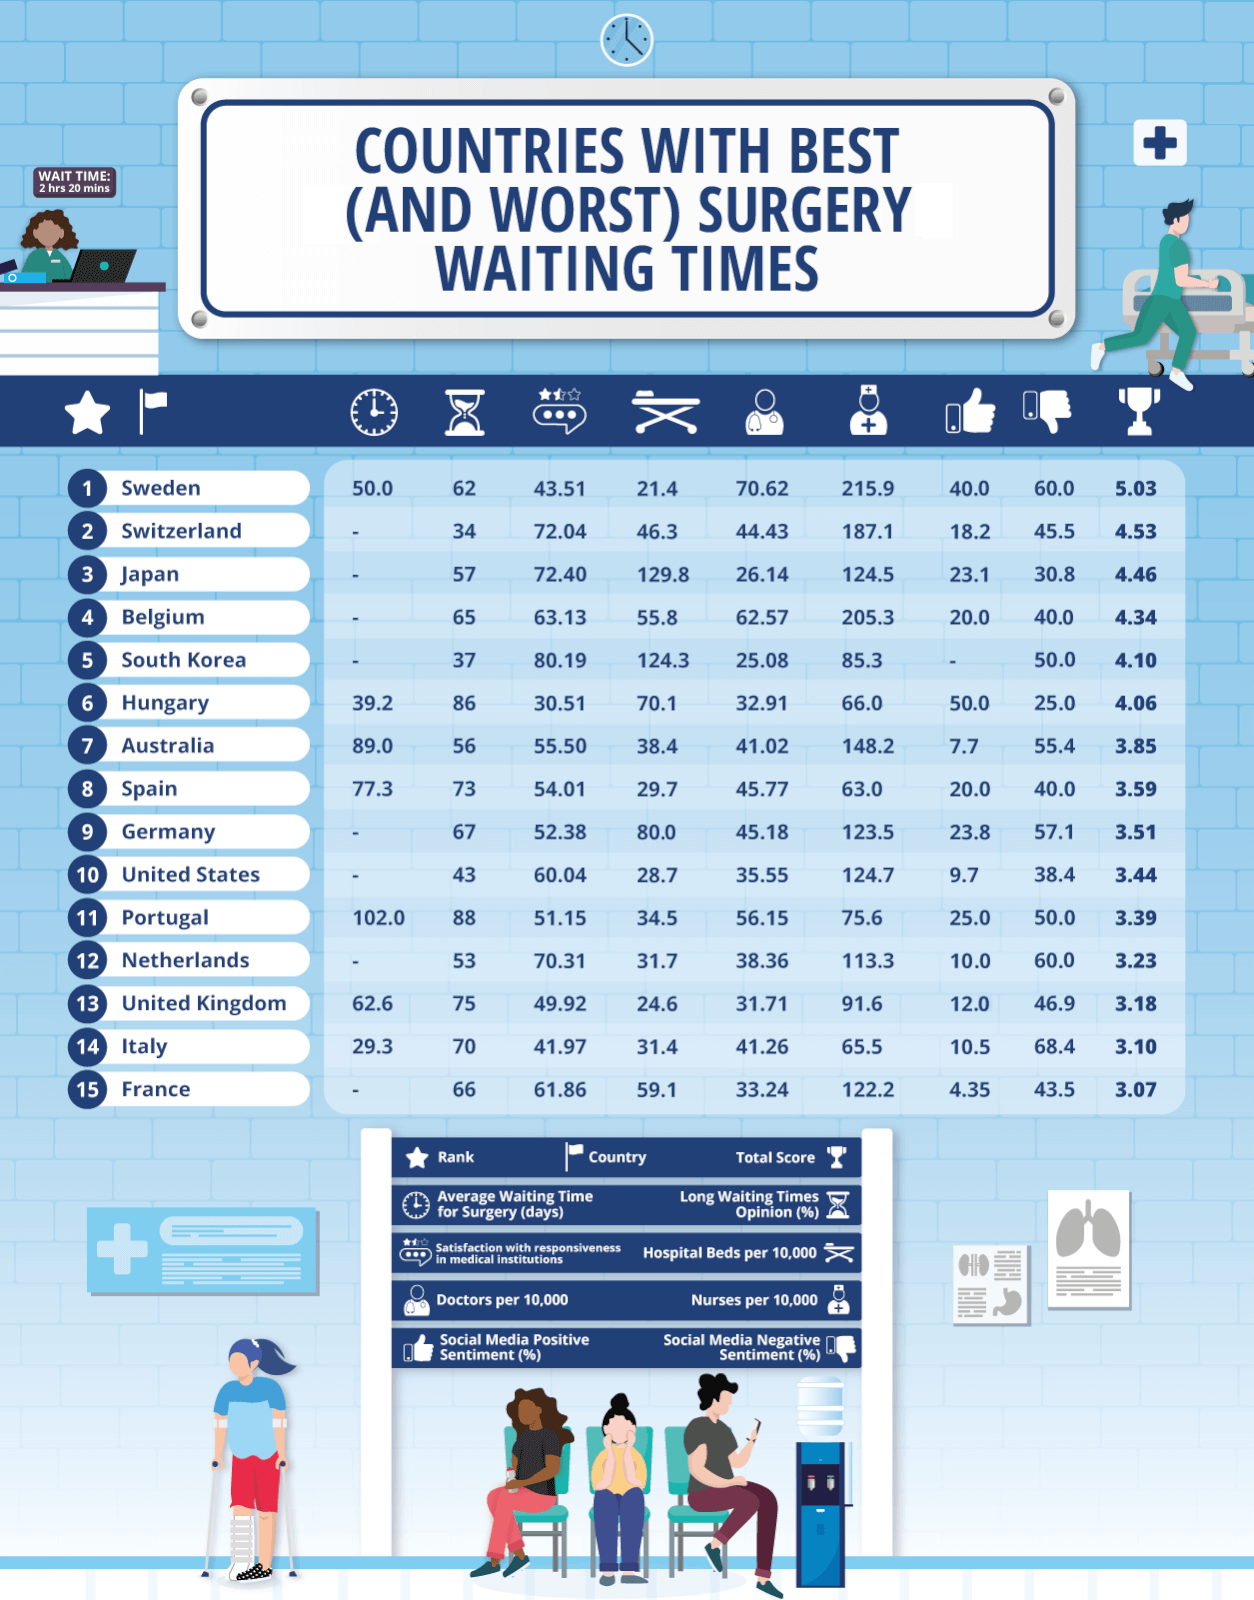 Table showing the countries with the best and worst surgery waiting times.